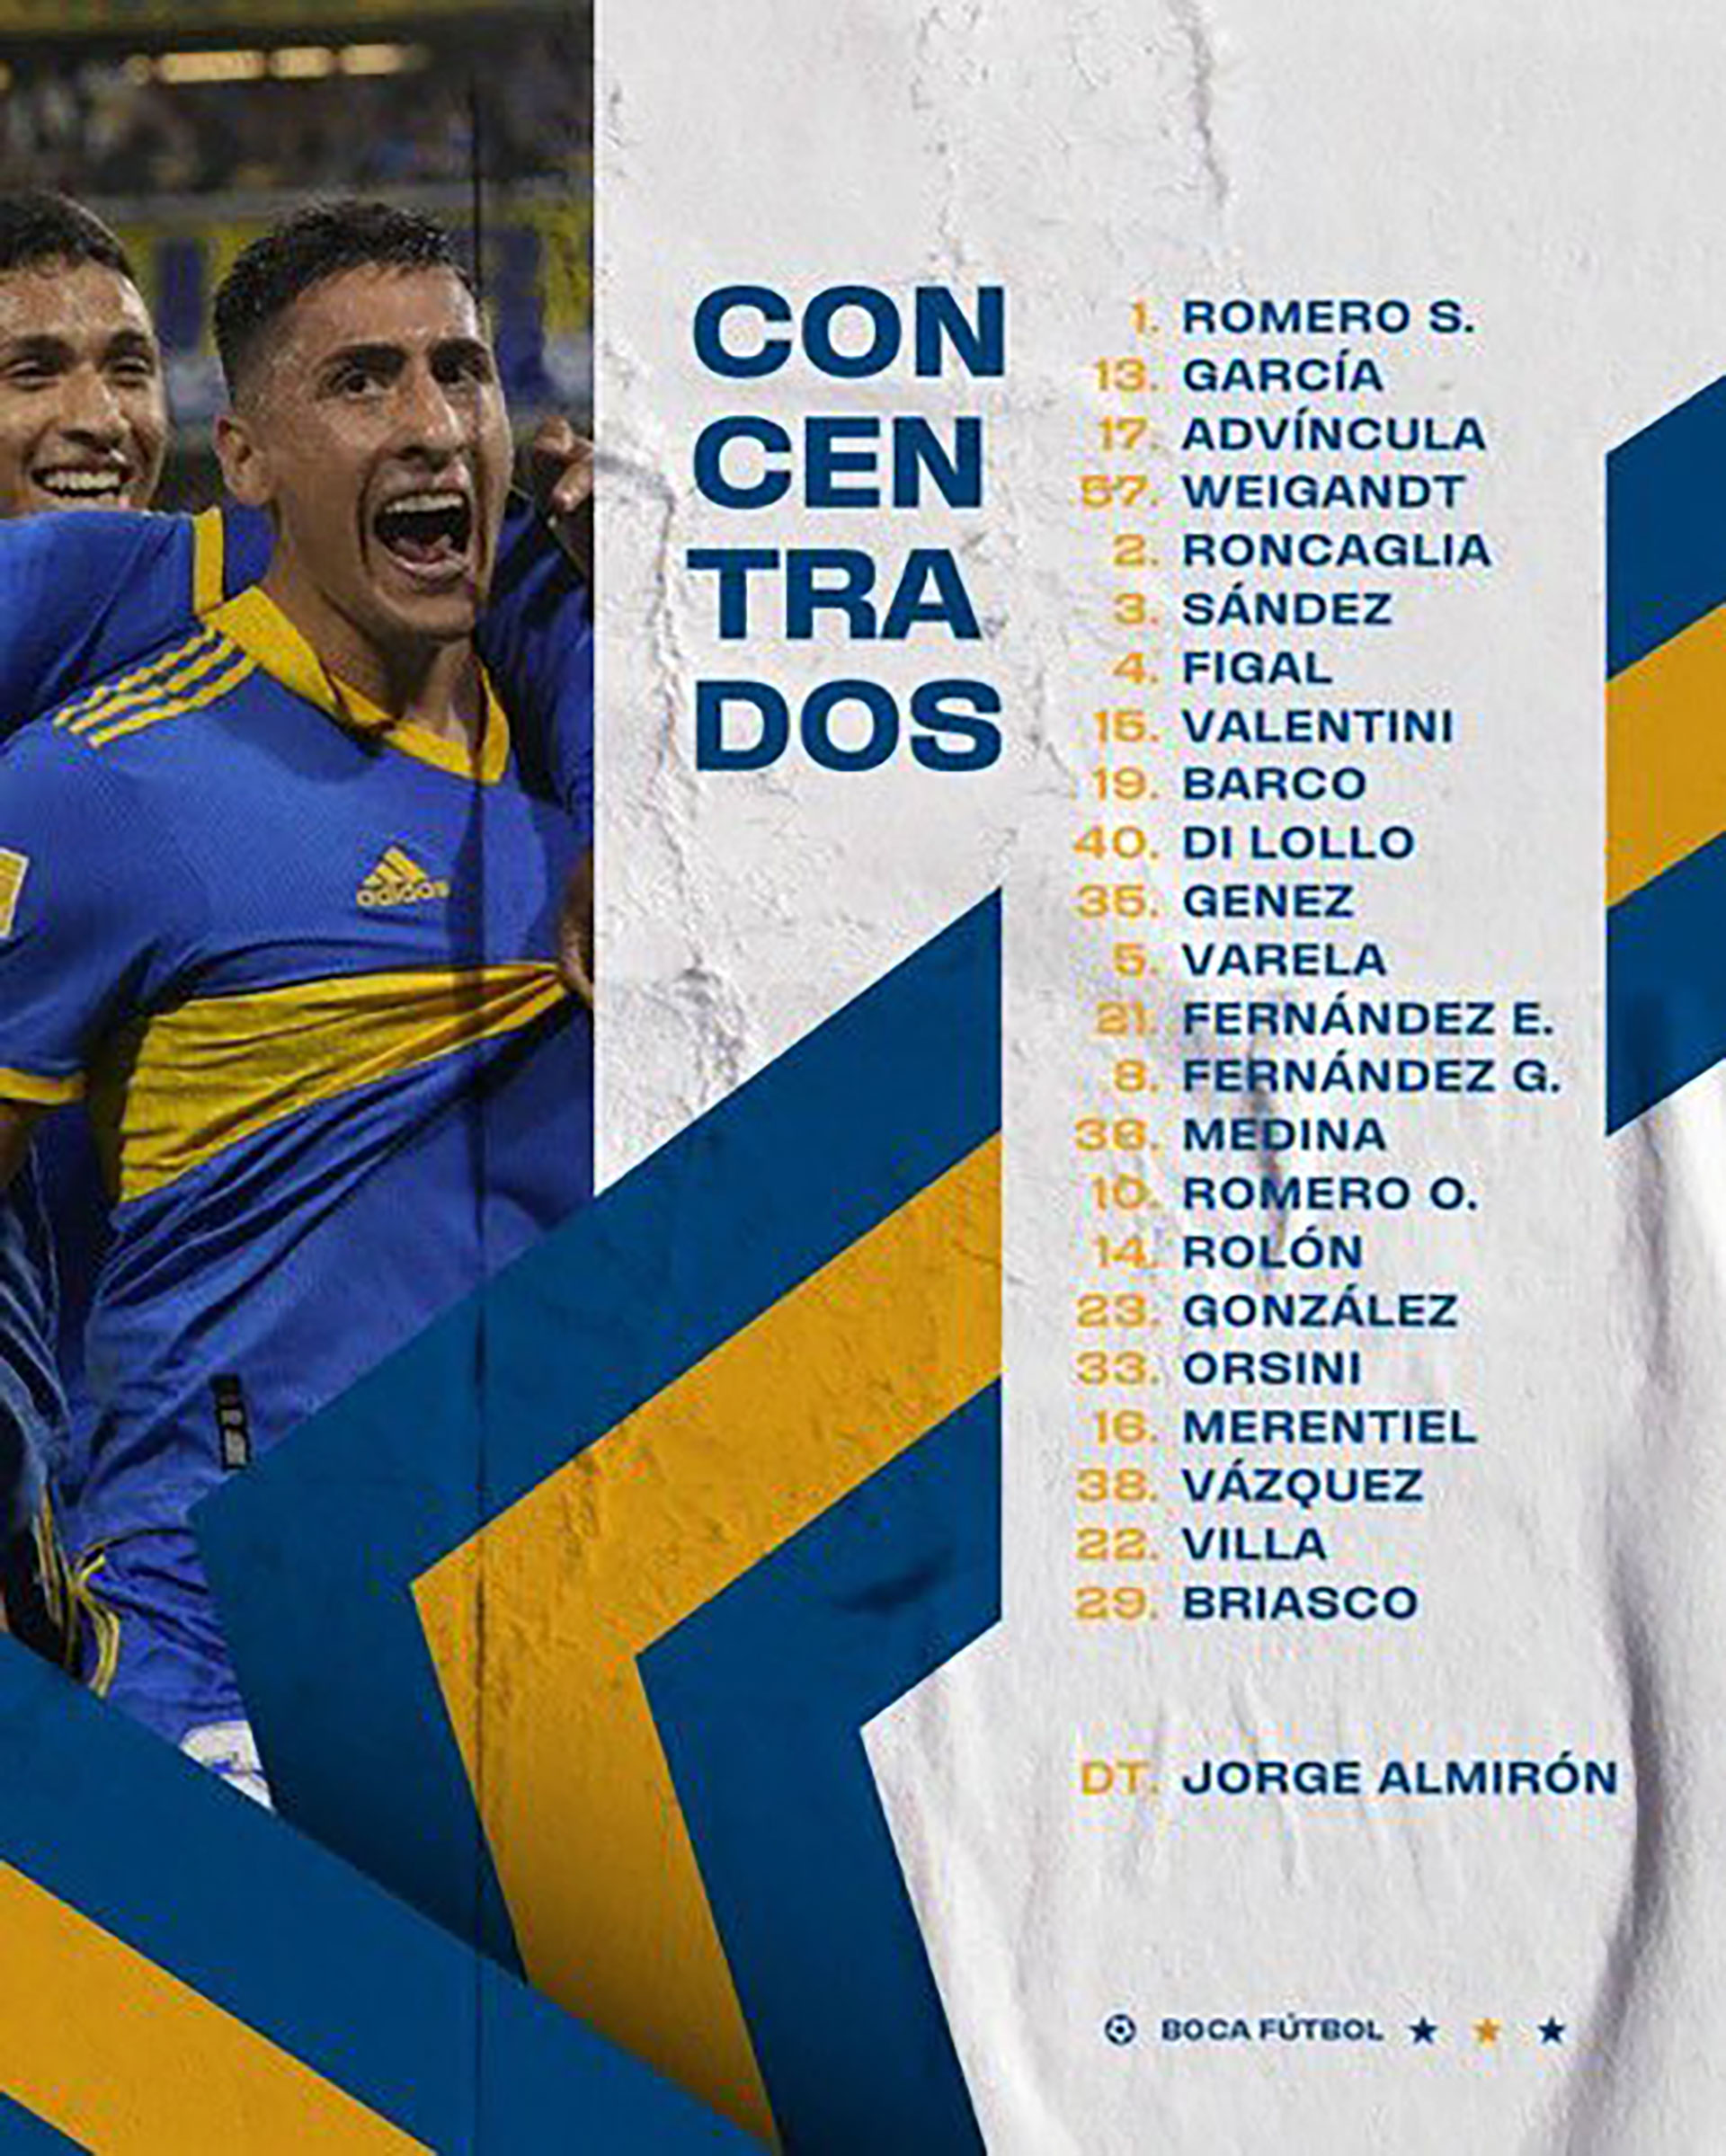 The list of concentrates in Boca Juniors to visit River